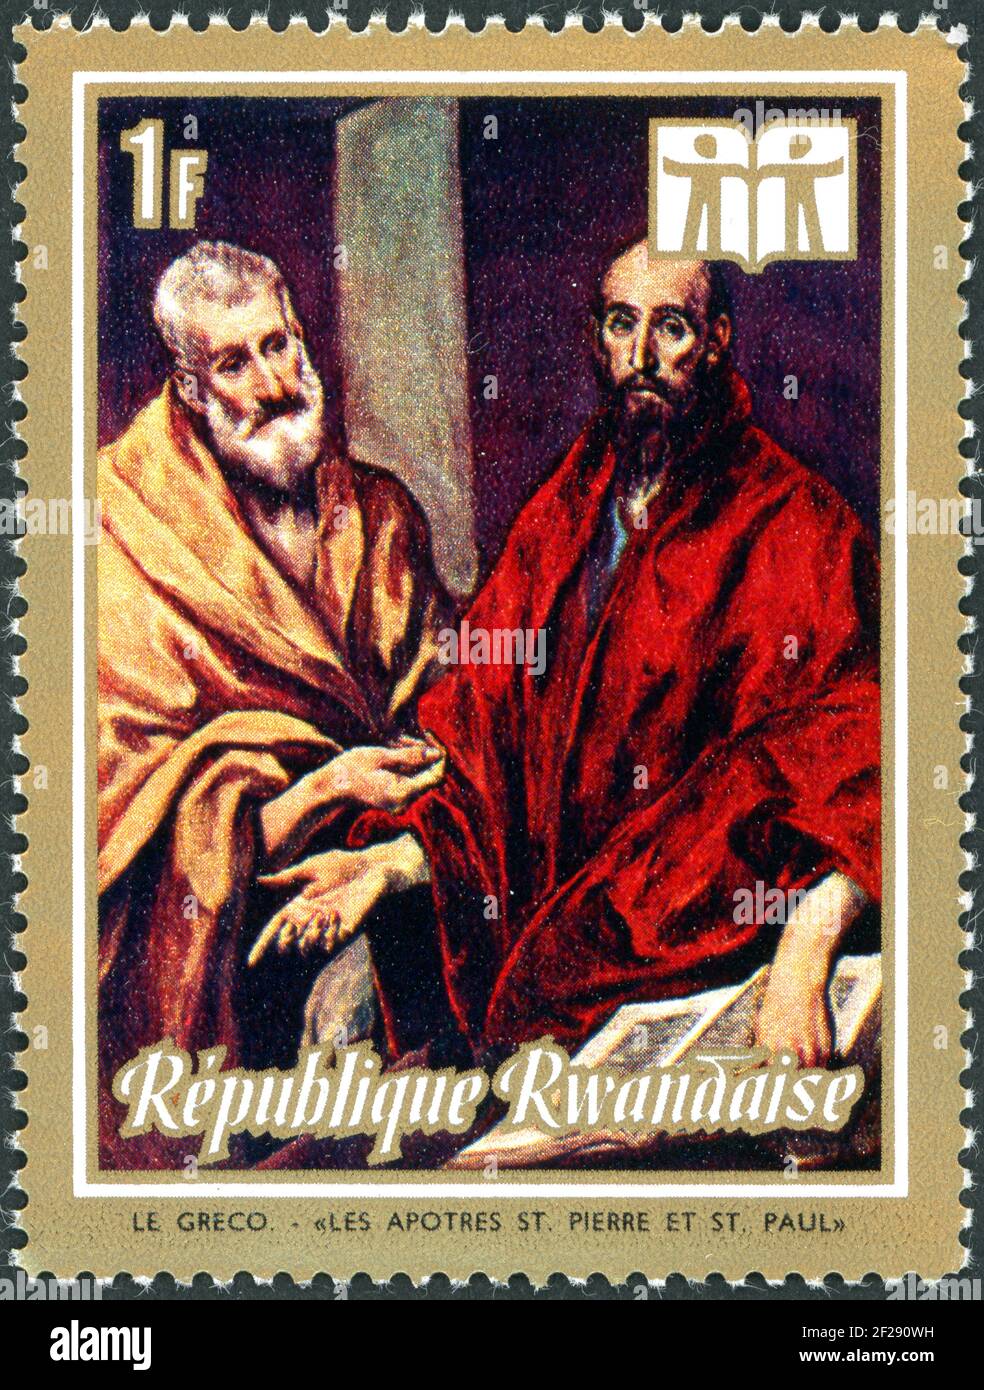 RWANDA - CIRCA 1973: A stamp printed in Rwanda, shown the painting by El Greco - The apostles St. Peter and St. Paul, circa 1973 Stock Photo